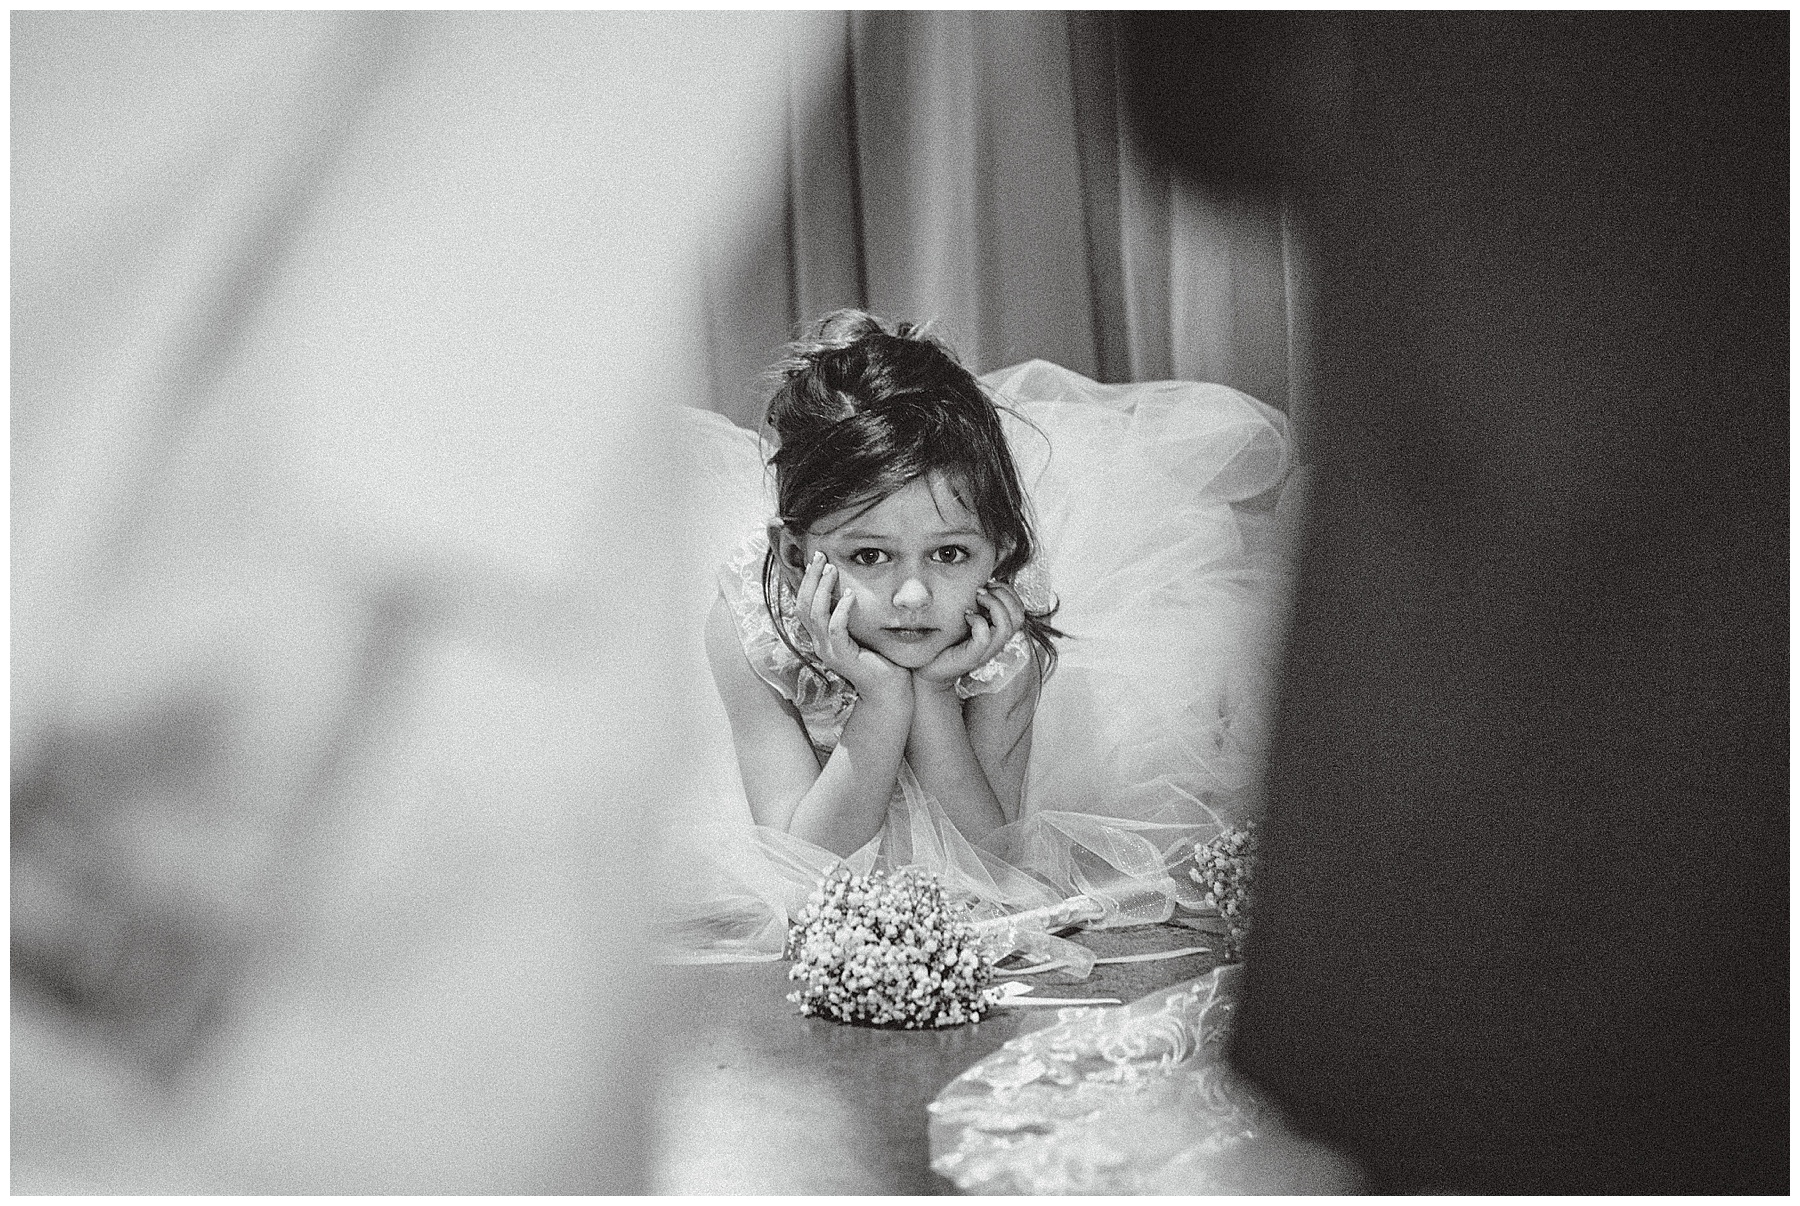 Flower girl hold hands on face during ceremony